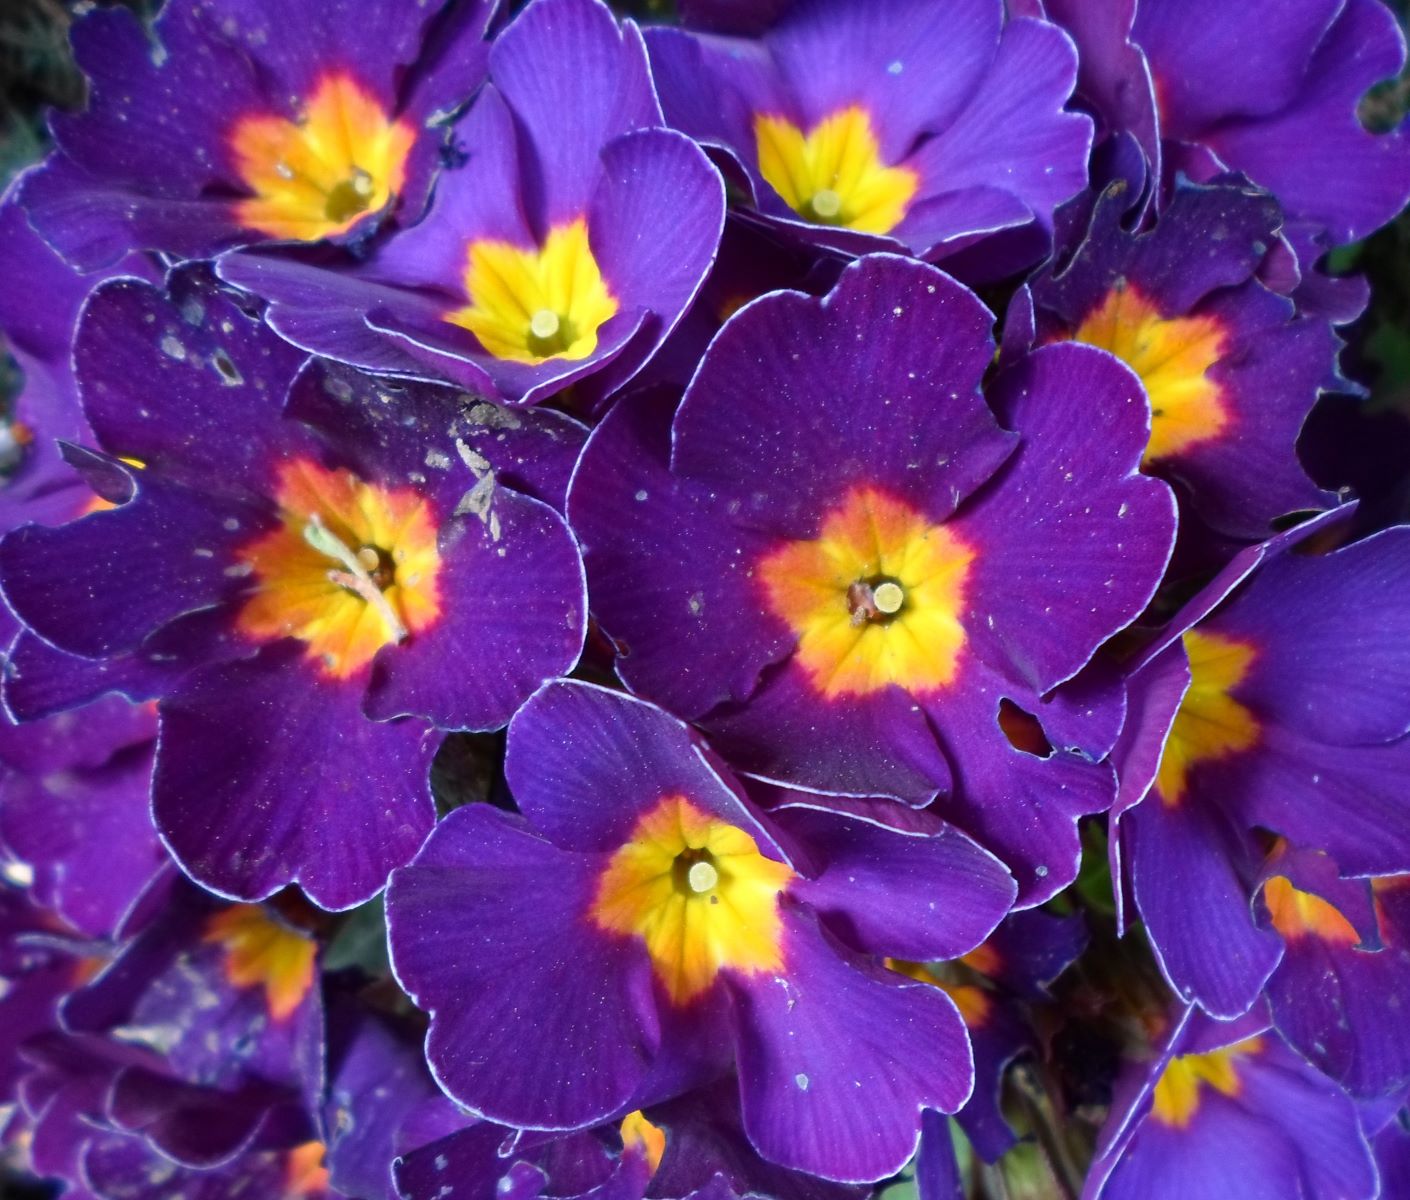 The Stunning Yellow And Purple Flower You Need To See!